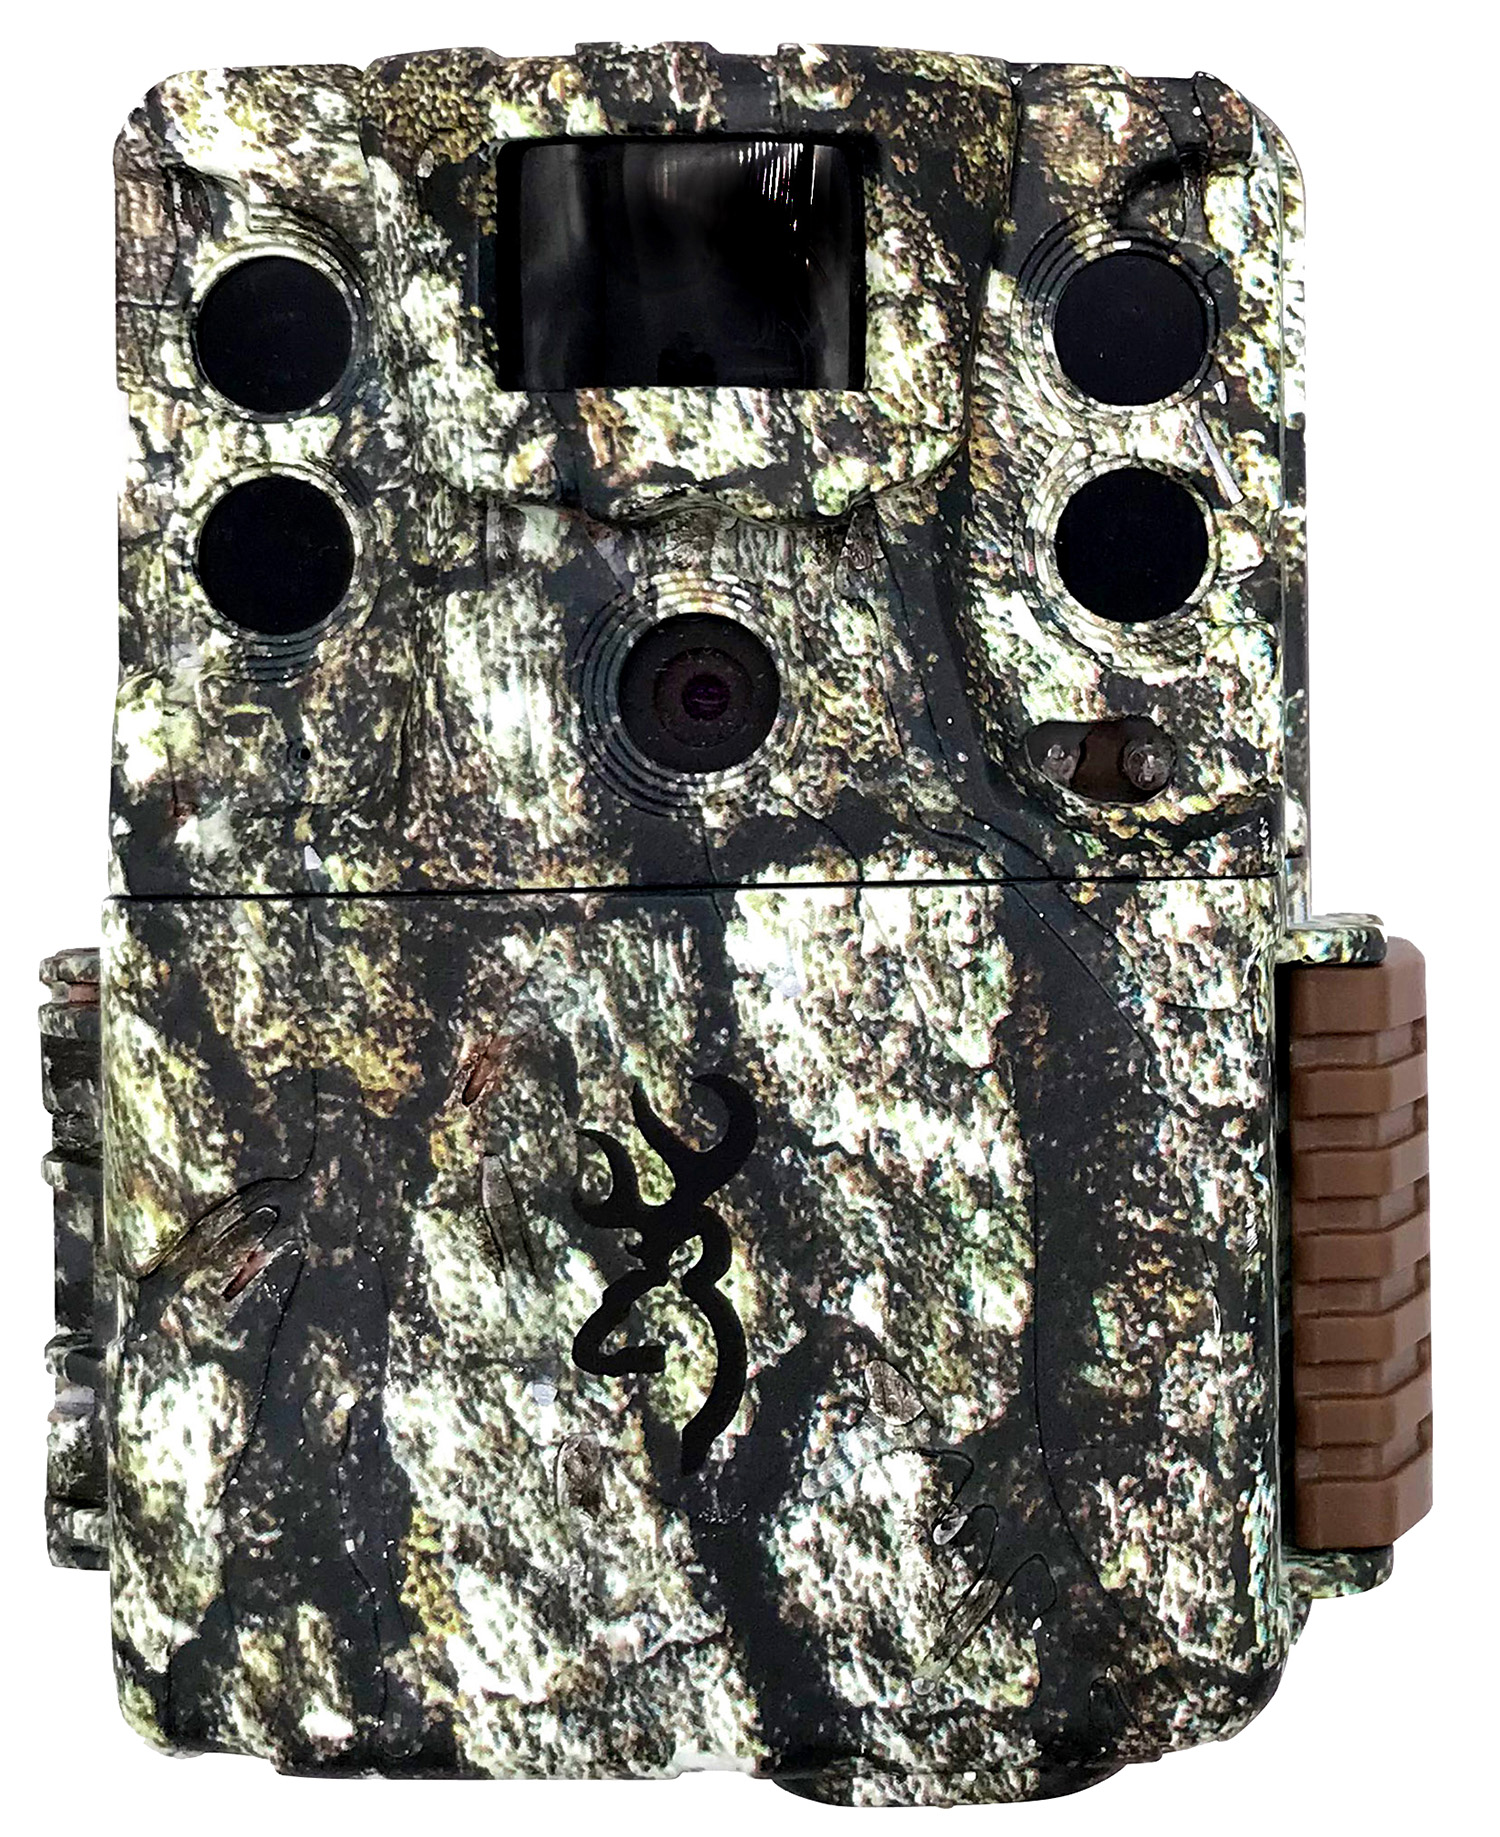 BROWNING TRAIL CAM COMMAND OPS ELITE 20MP 900pHD+ VIDEO CAMO